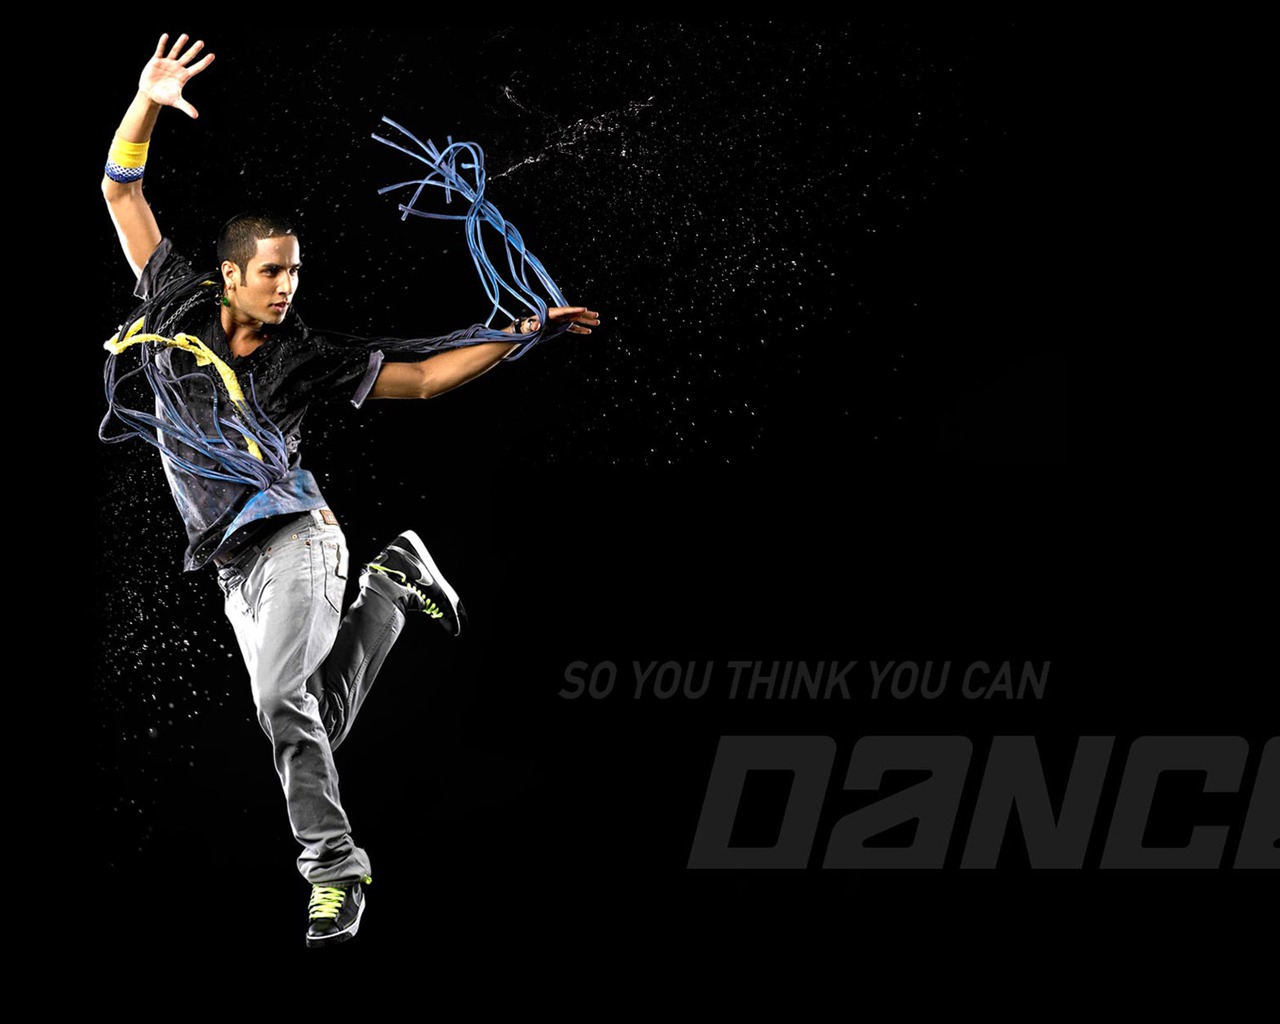 So You Think You Can Dance Wallpaper (1) #4 - 1280x1024